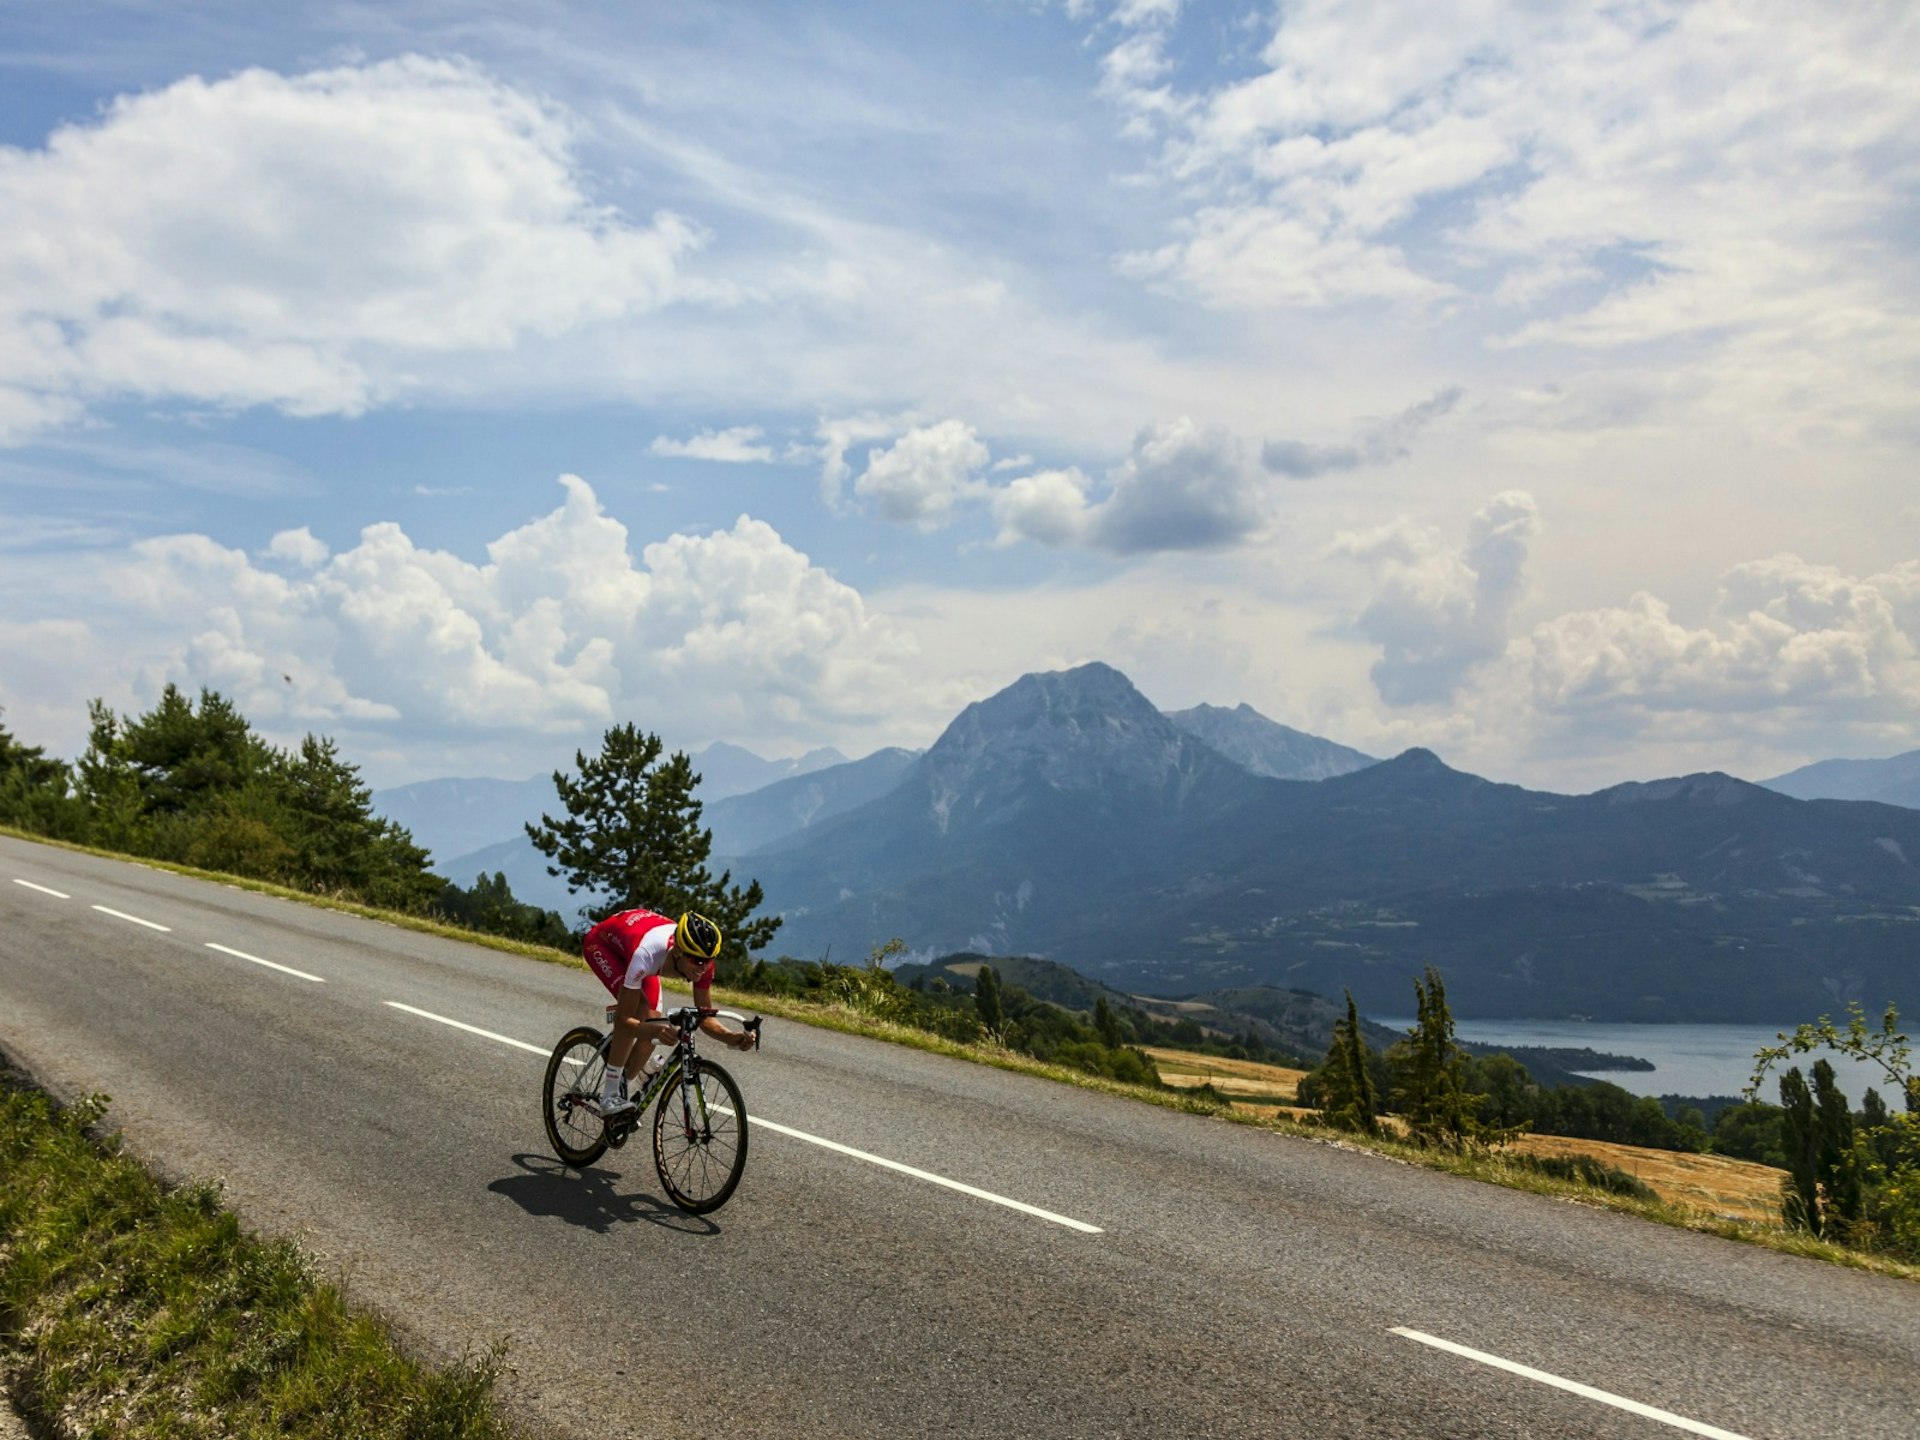 Tour de France - A cyclist rides between Embrun and Chorges during the Tour de France against a stunning backdrop of lakes, mountains and a cloud-streaked sky. The cyclist's jersey is red and white and they wear a sleek black and yellow helmet